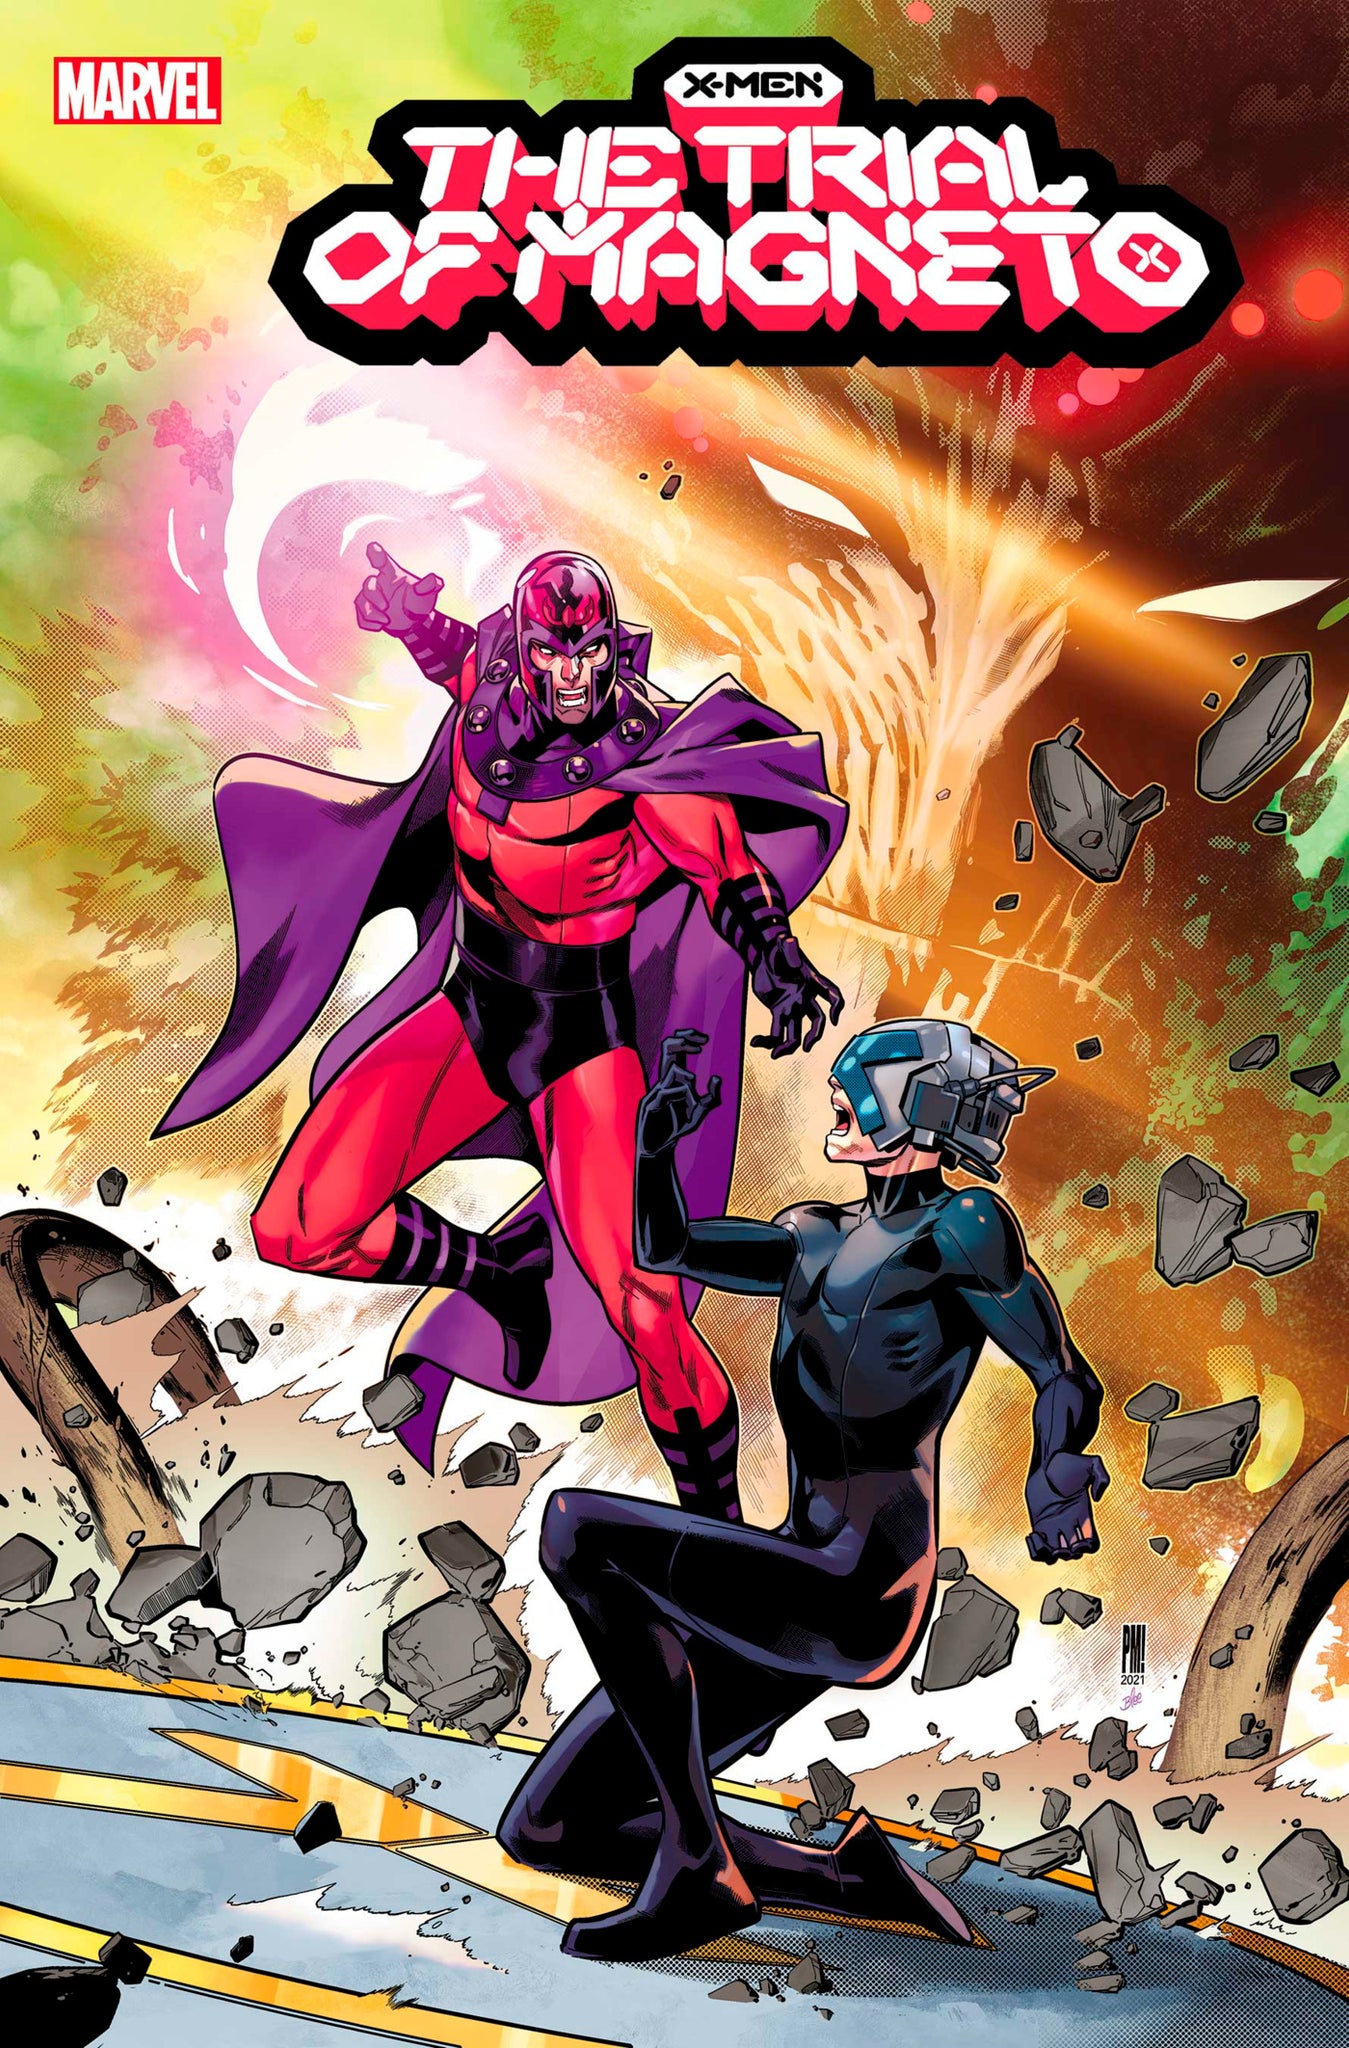 X-MEN: THE TRIAL OF MAGNETO 4